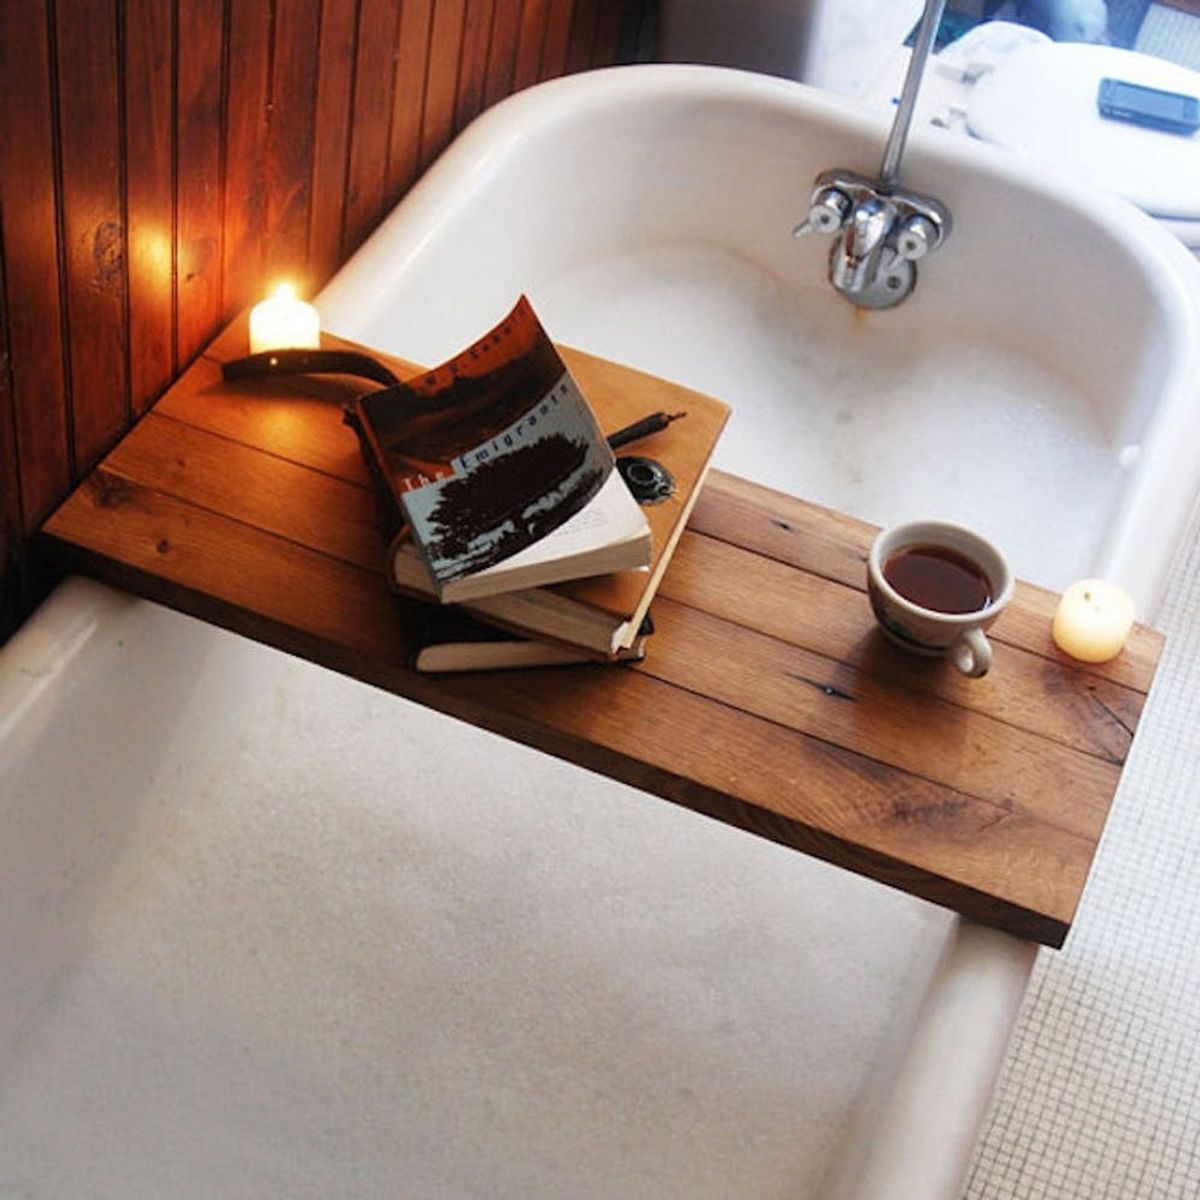 12 Etsy Products to Turn Your Bathroom into a Relaxing Oasis